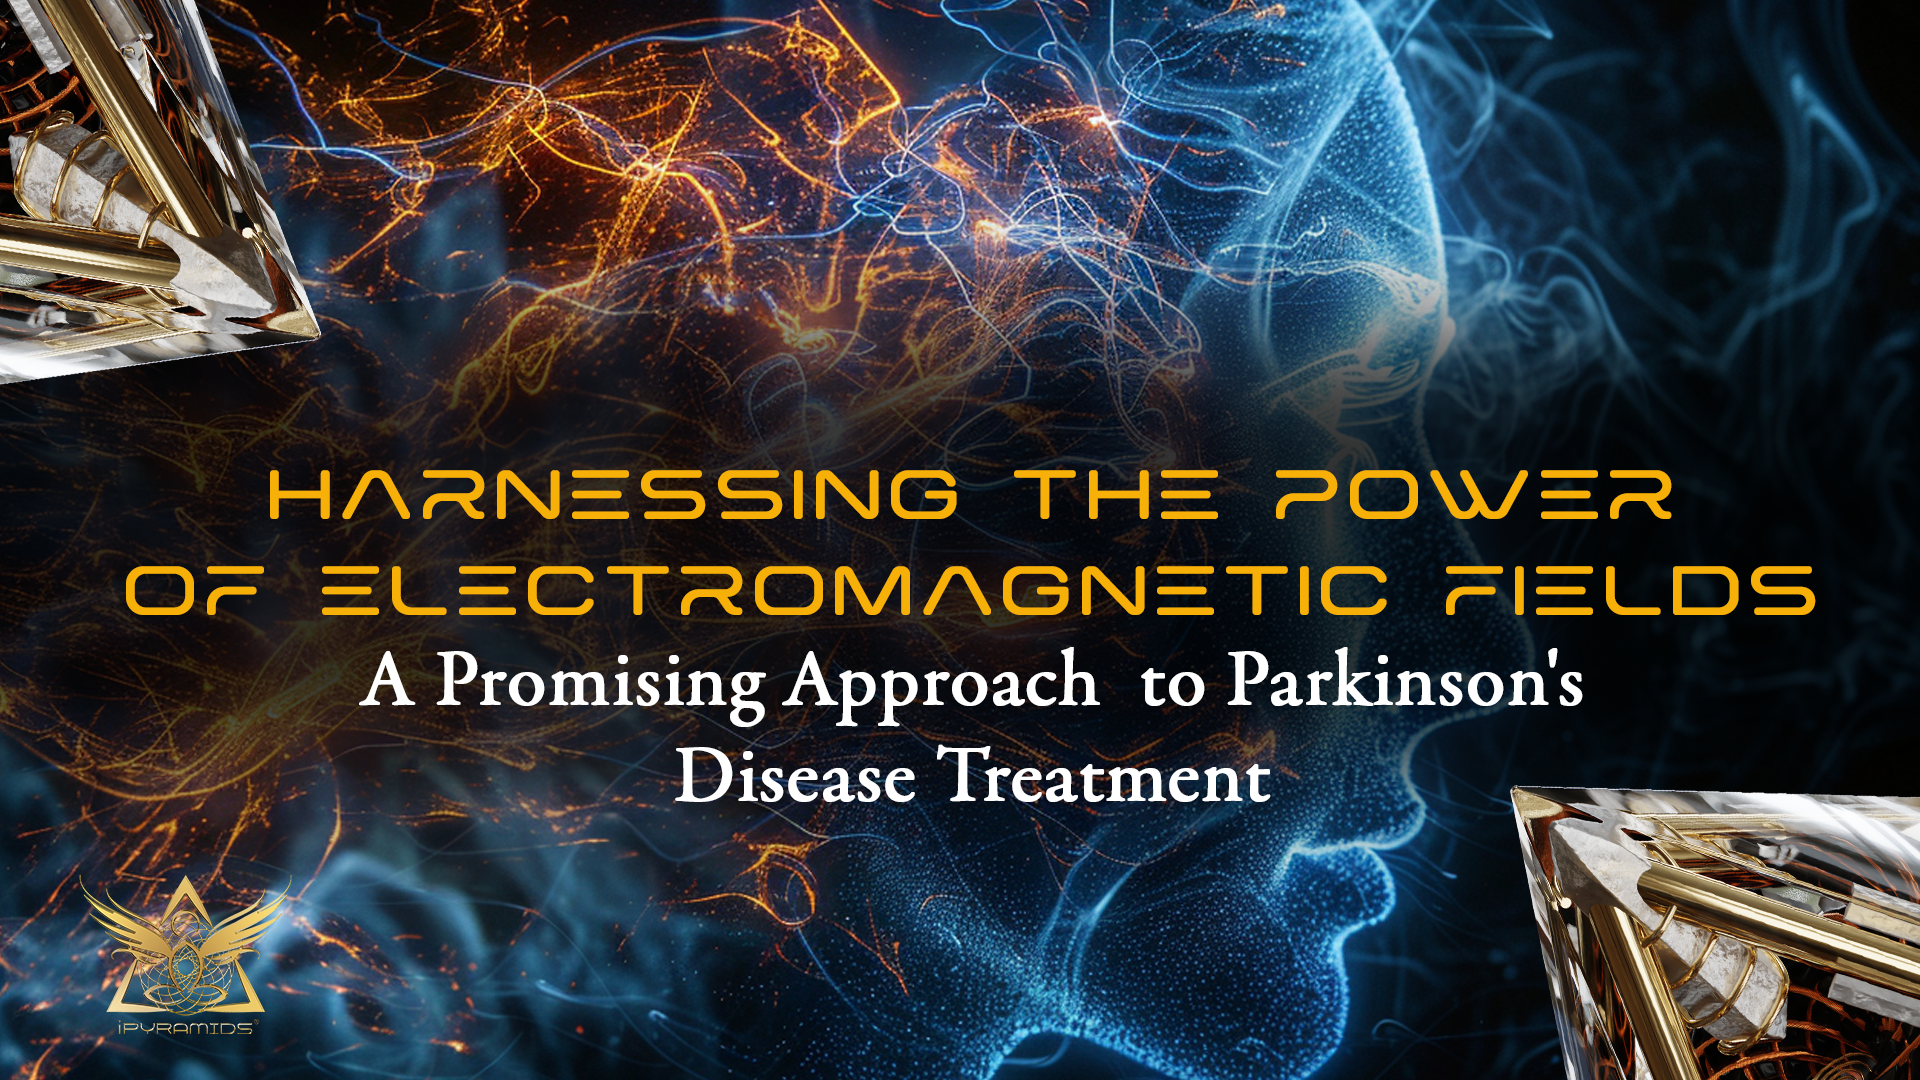 Harnessing the Power of Electromagnetic Fields: A Promising Approach to Parkinson's Disease Treatment